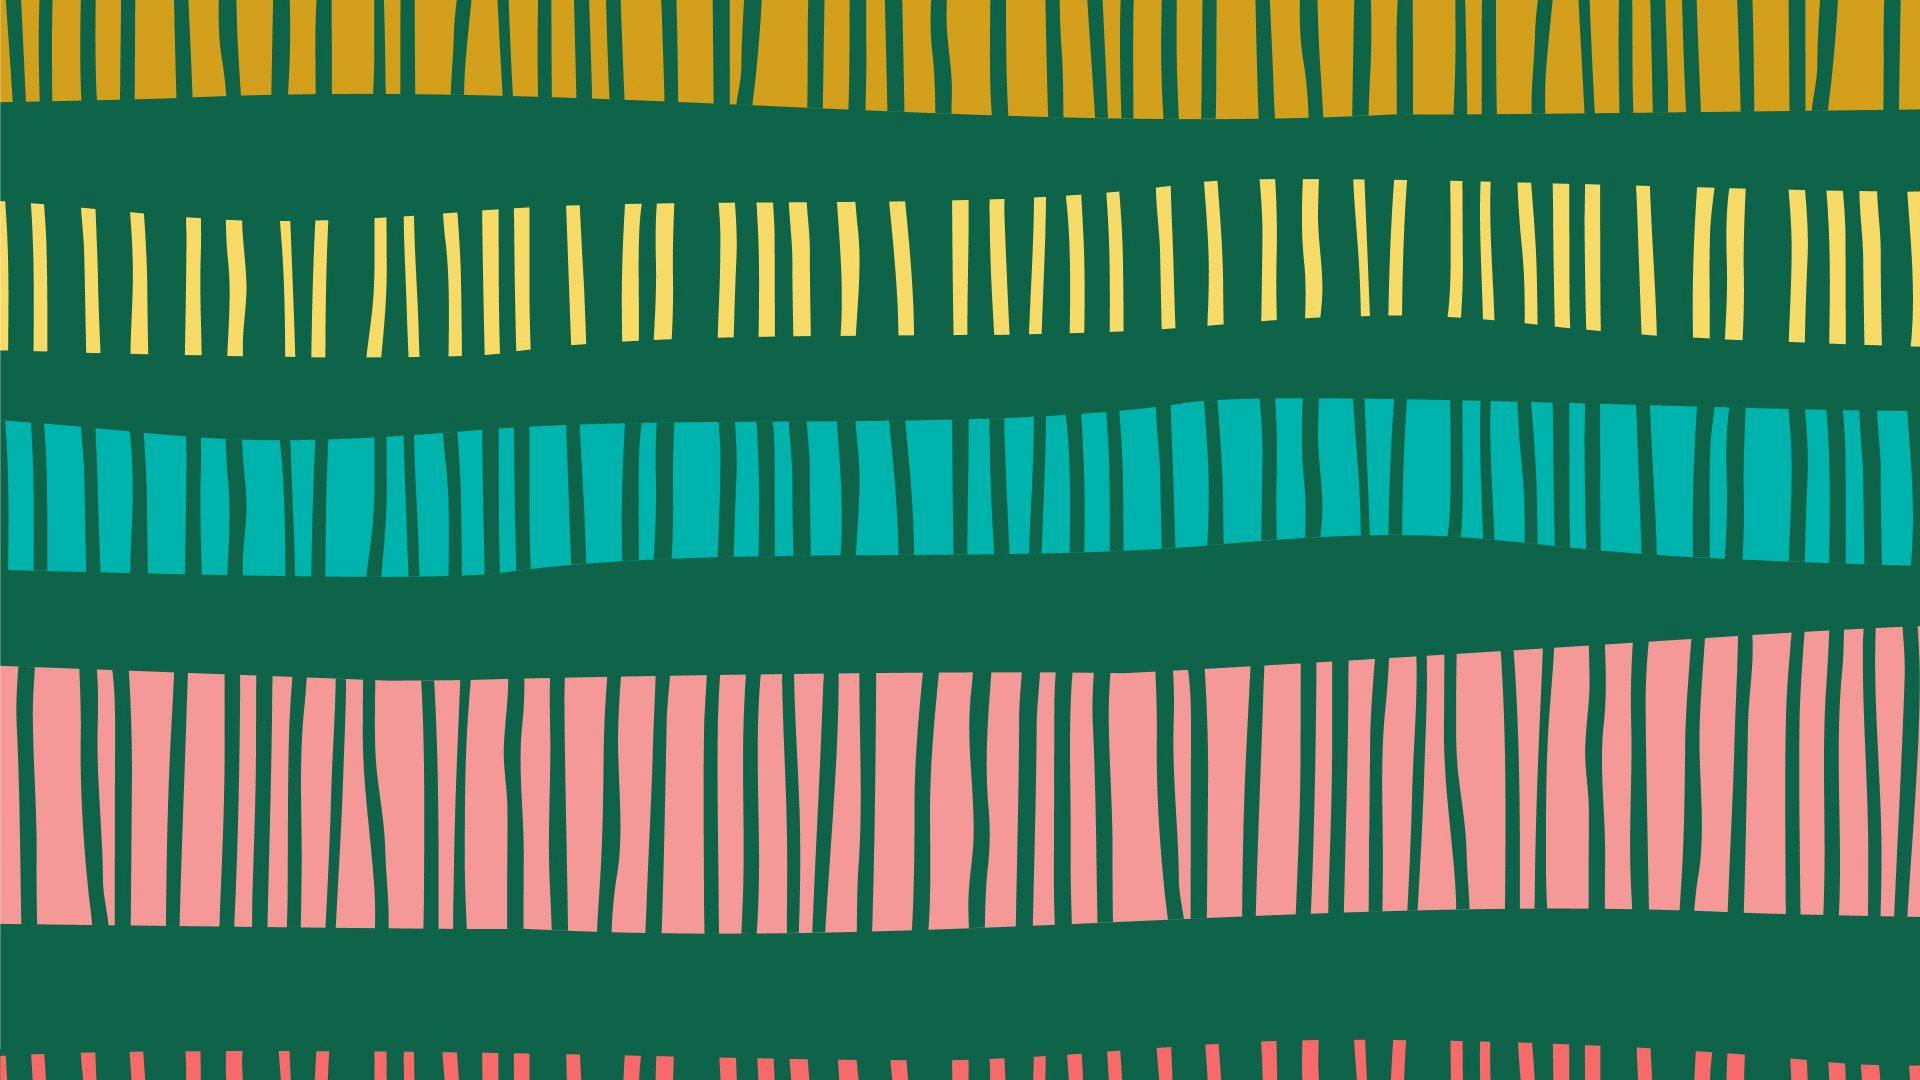 Illustration of green with pink, blue, yellow stripes across